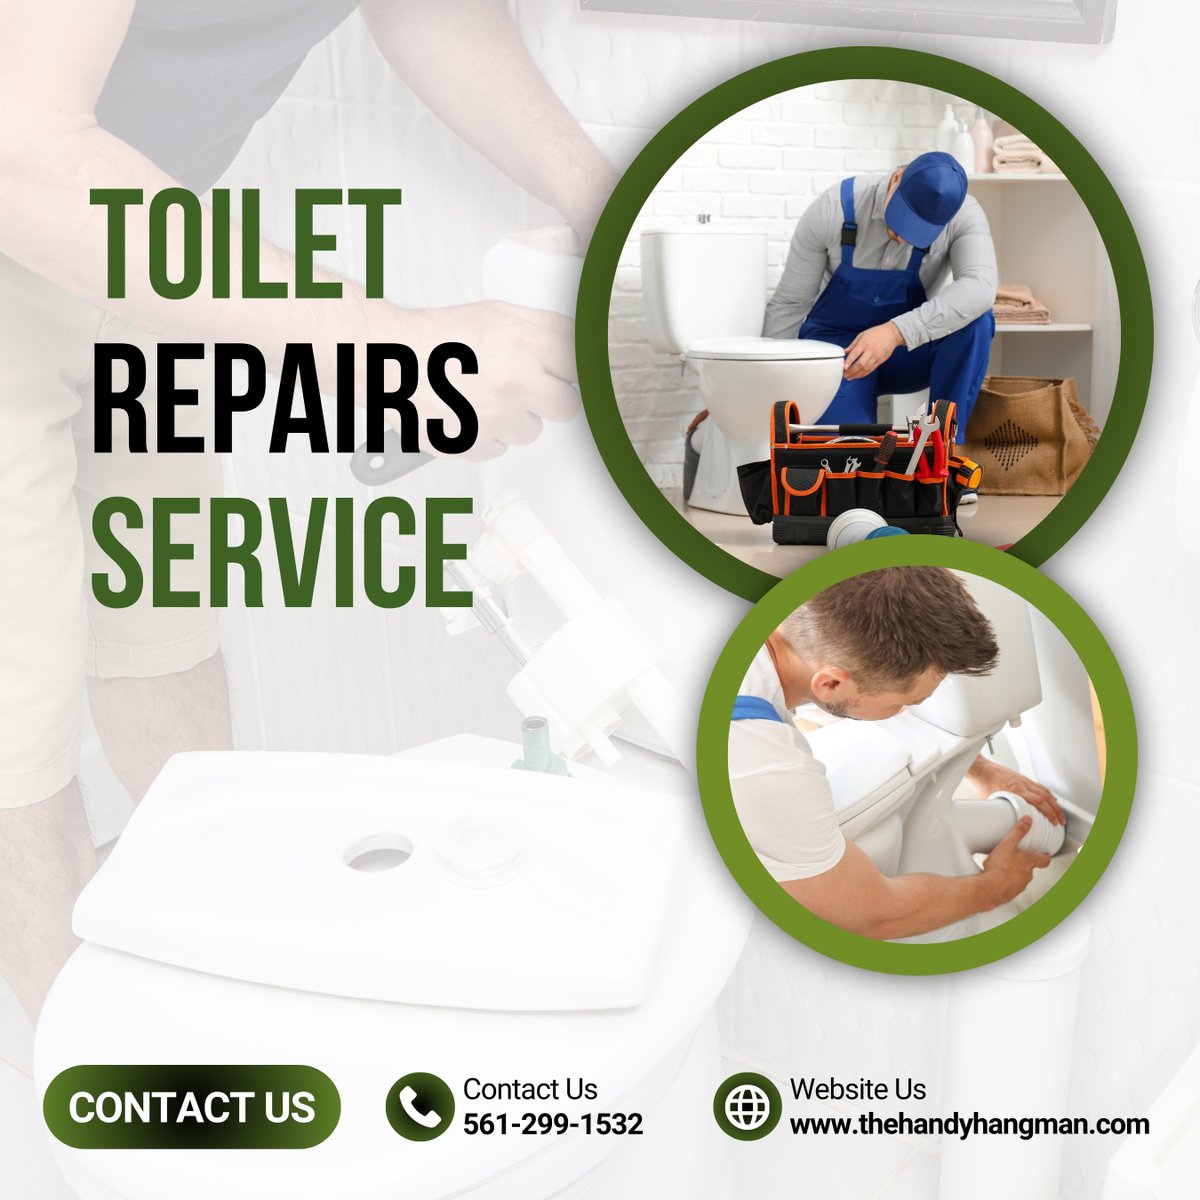 Stop wasting water and money! Our Leaking Toilets Services fix leaks fast, saving you hassle and bills. Don't let a small leak turn into a flood. Call us today for expert help! #LeakingToilets #PlumbingServices #WaterLeaks #SaveWater #FixItFast #PlumbingExperts #HomeMaintenance